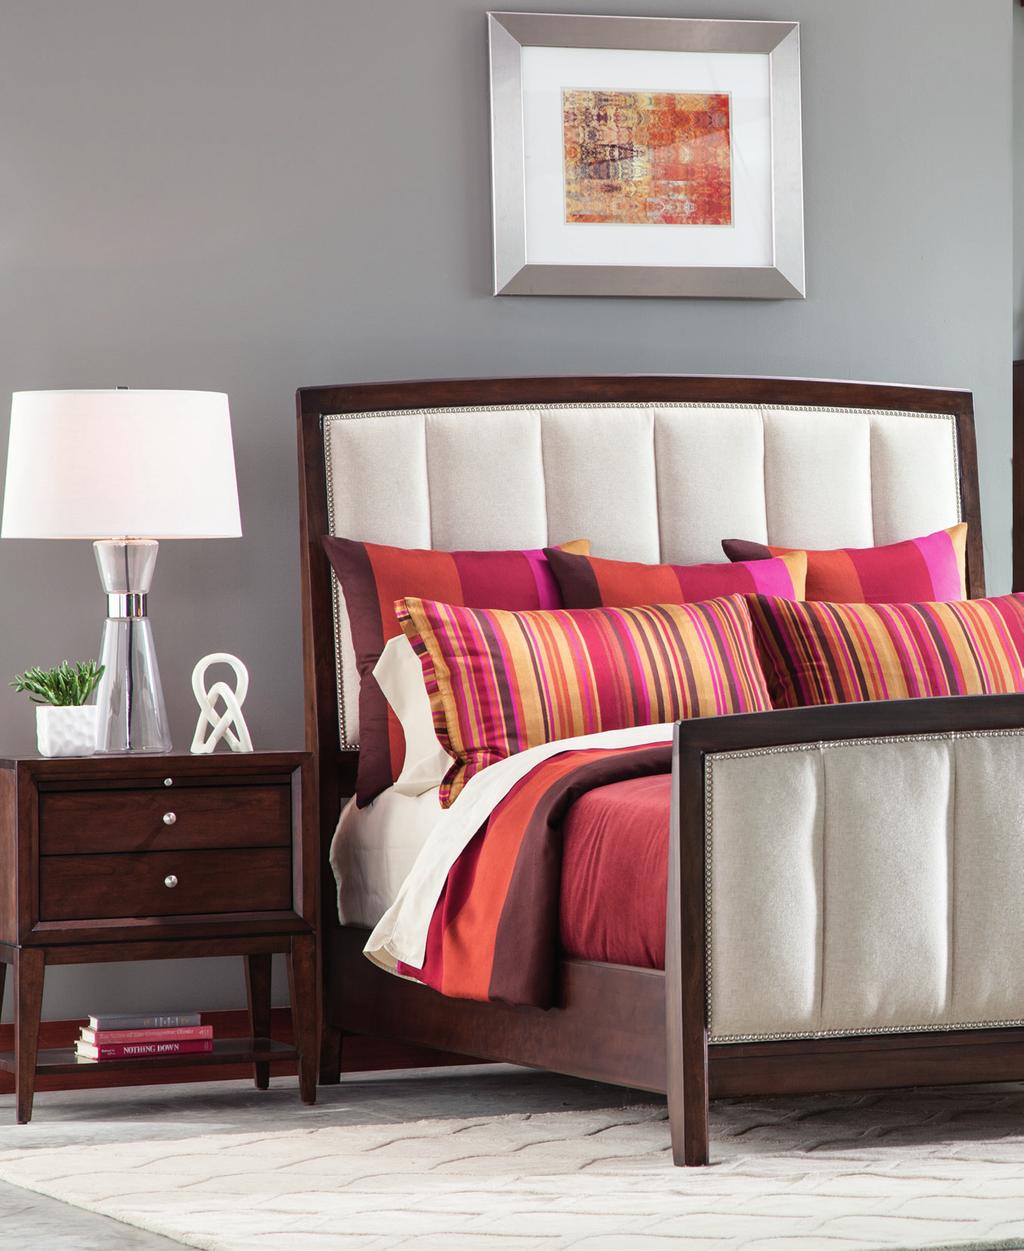 STUDIO 1904 COLLECTION As Shown: 85211-810 Night Stand and 85211-455 Upholstered 5/0 Panel Headboard. Upholstered 5/0 Panel Bed Headboard 85211-455 Timber Finish W64-1/2 D5 H61-1/2 in.